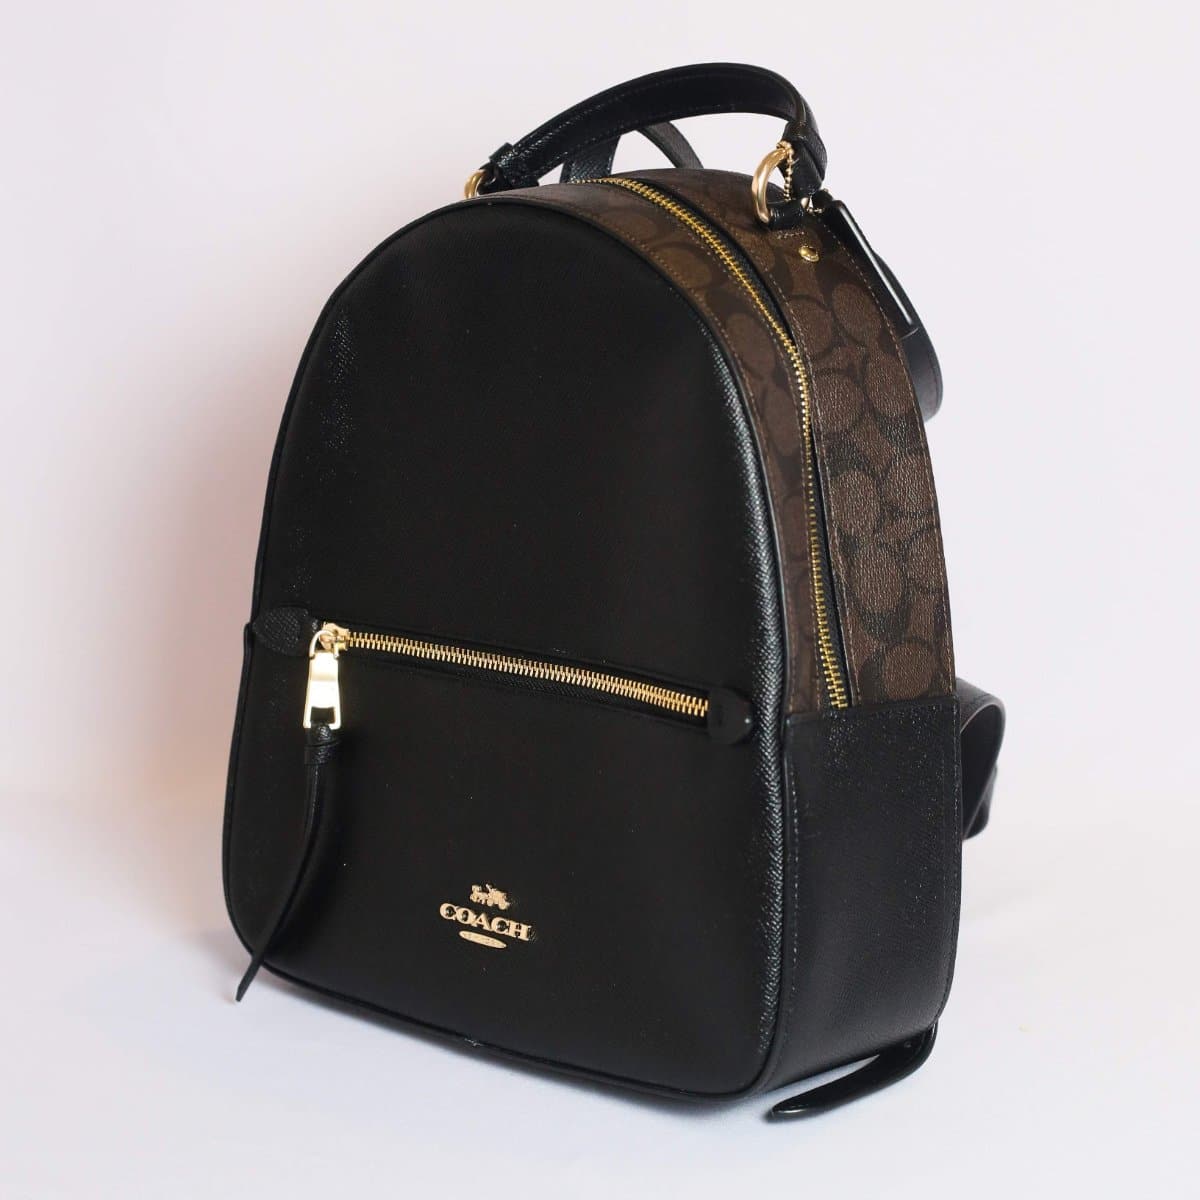 [View 43+] Coach Bag Brown Backpack